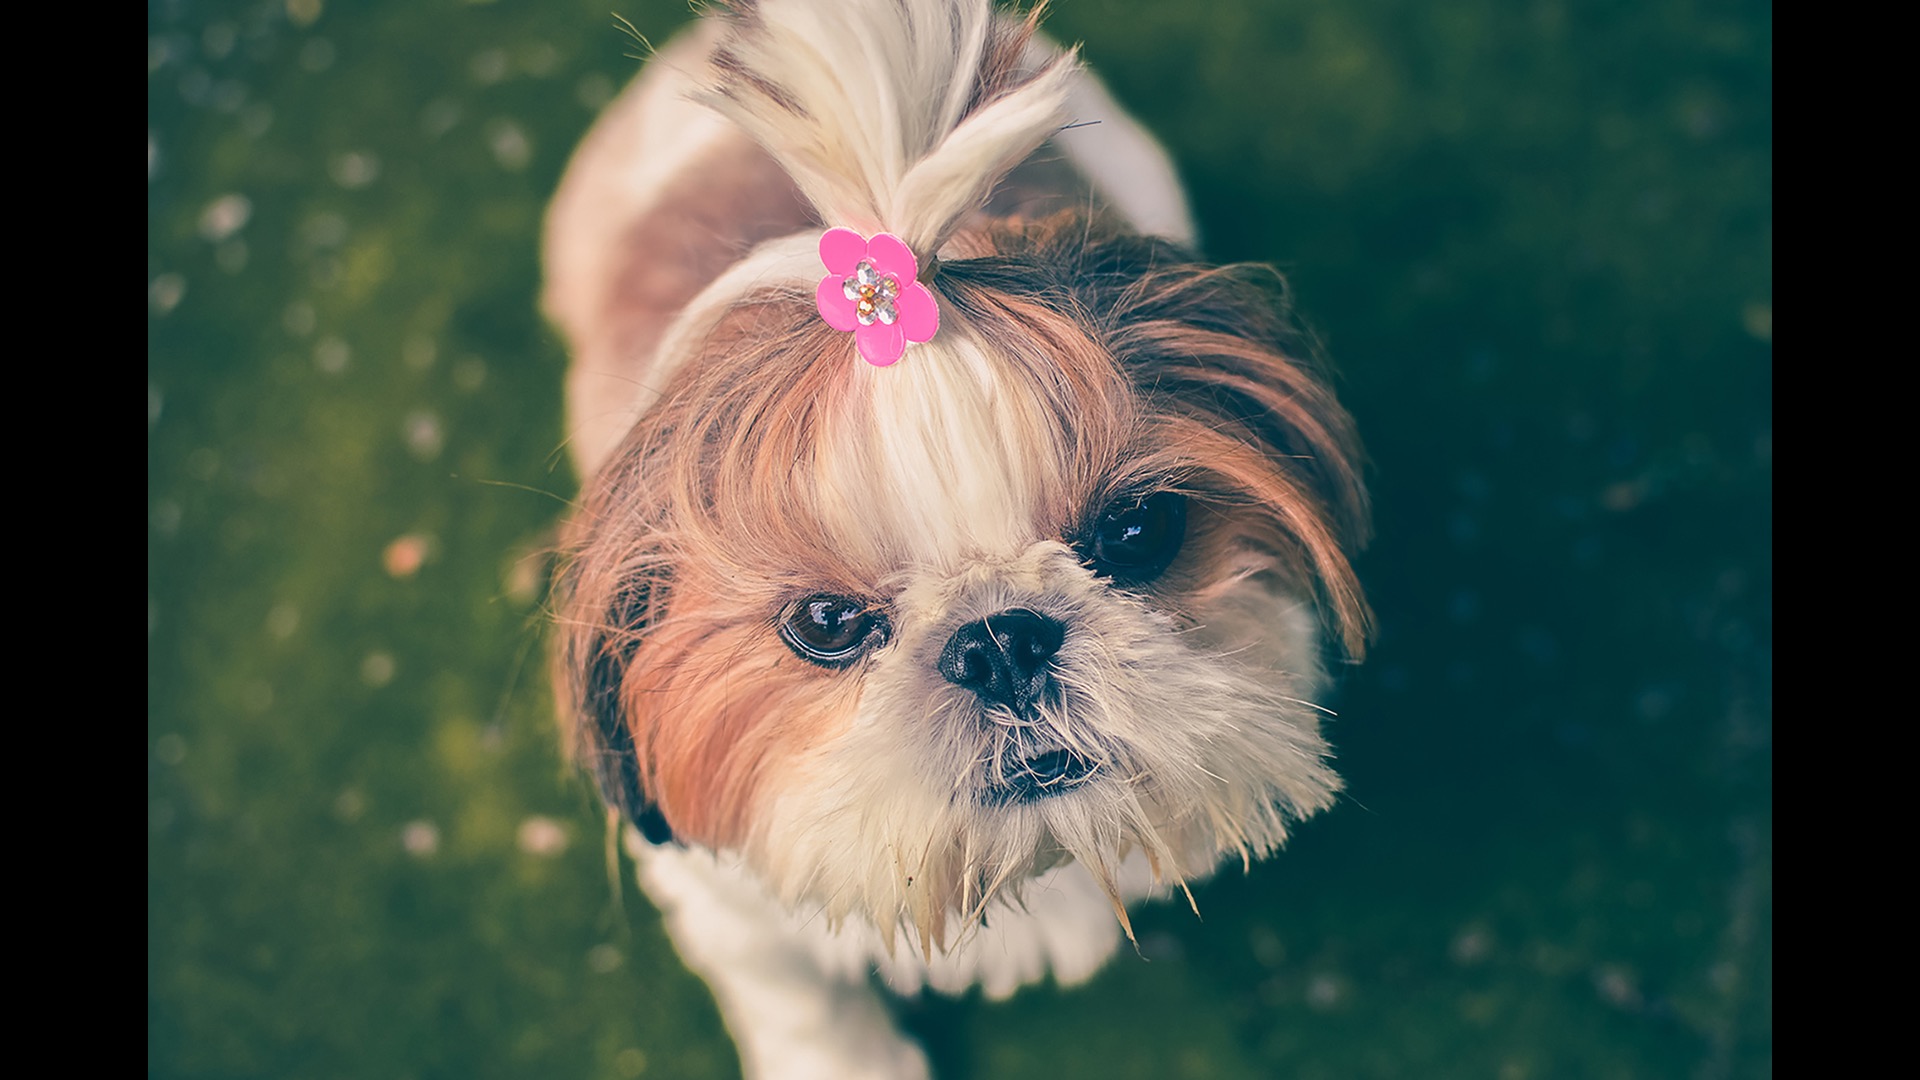 puppy with pink flower in hair